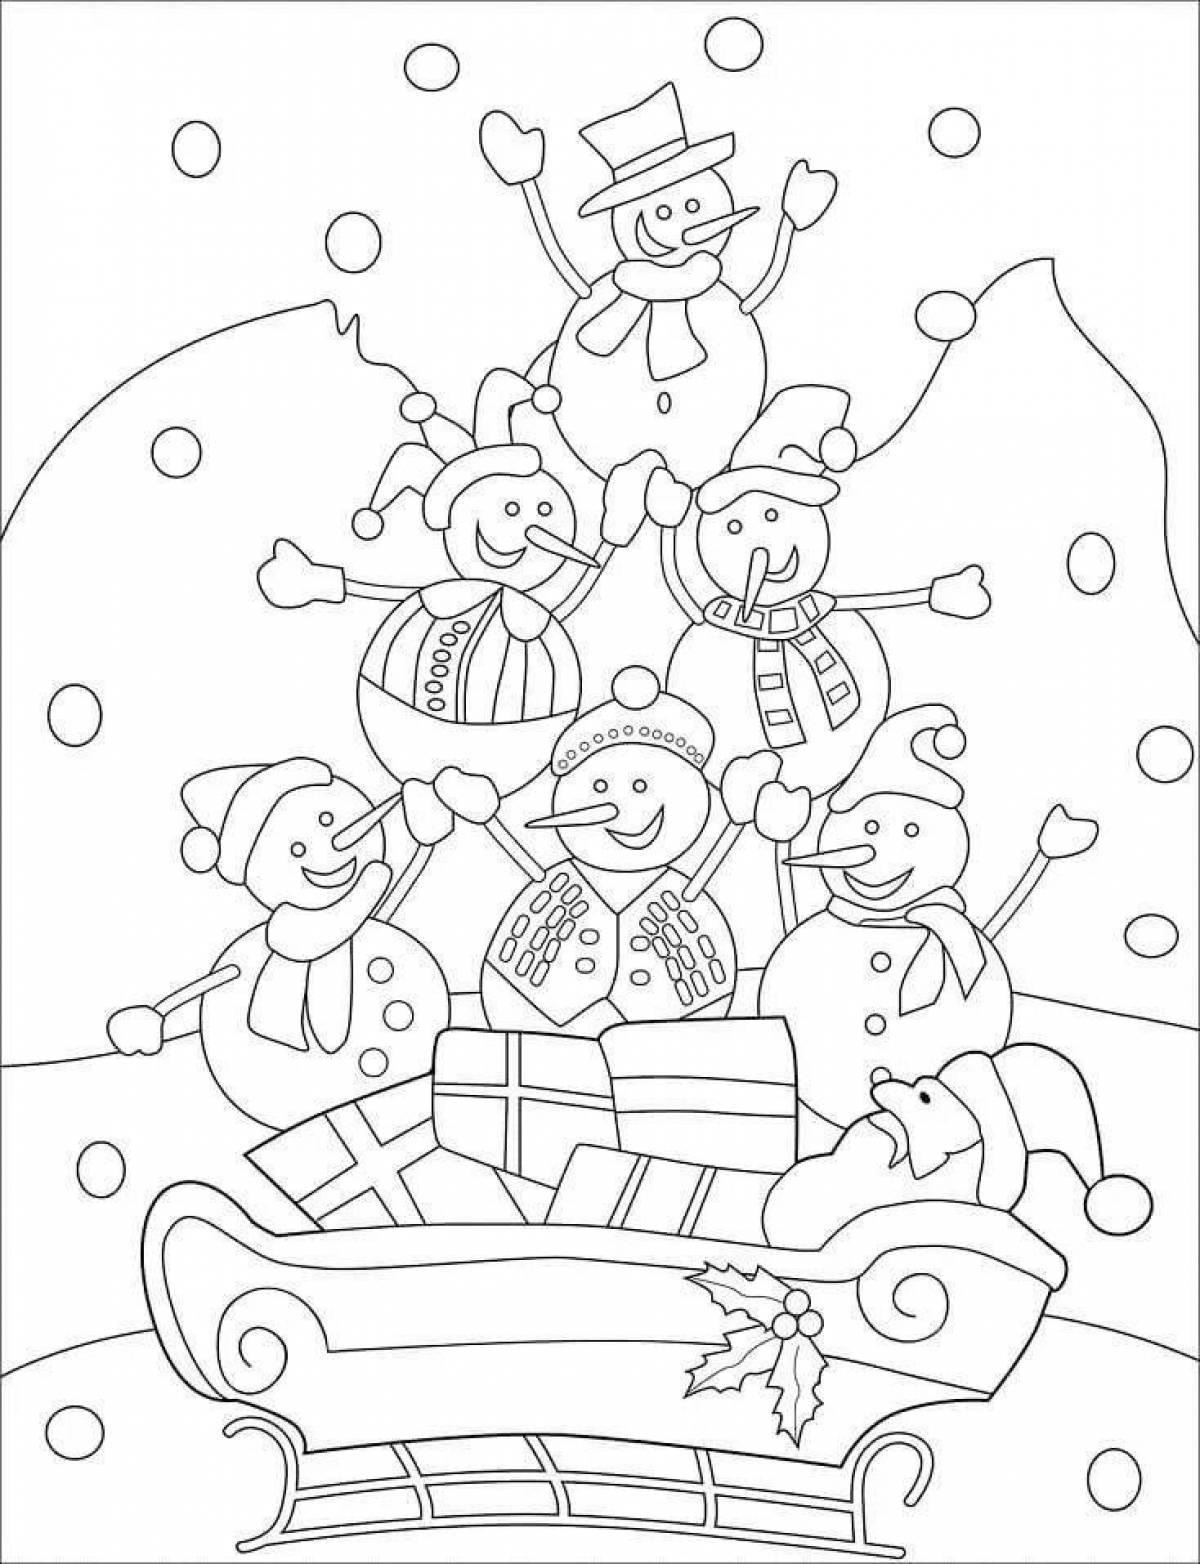 Glittering snowman happy birthday coloring page